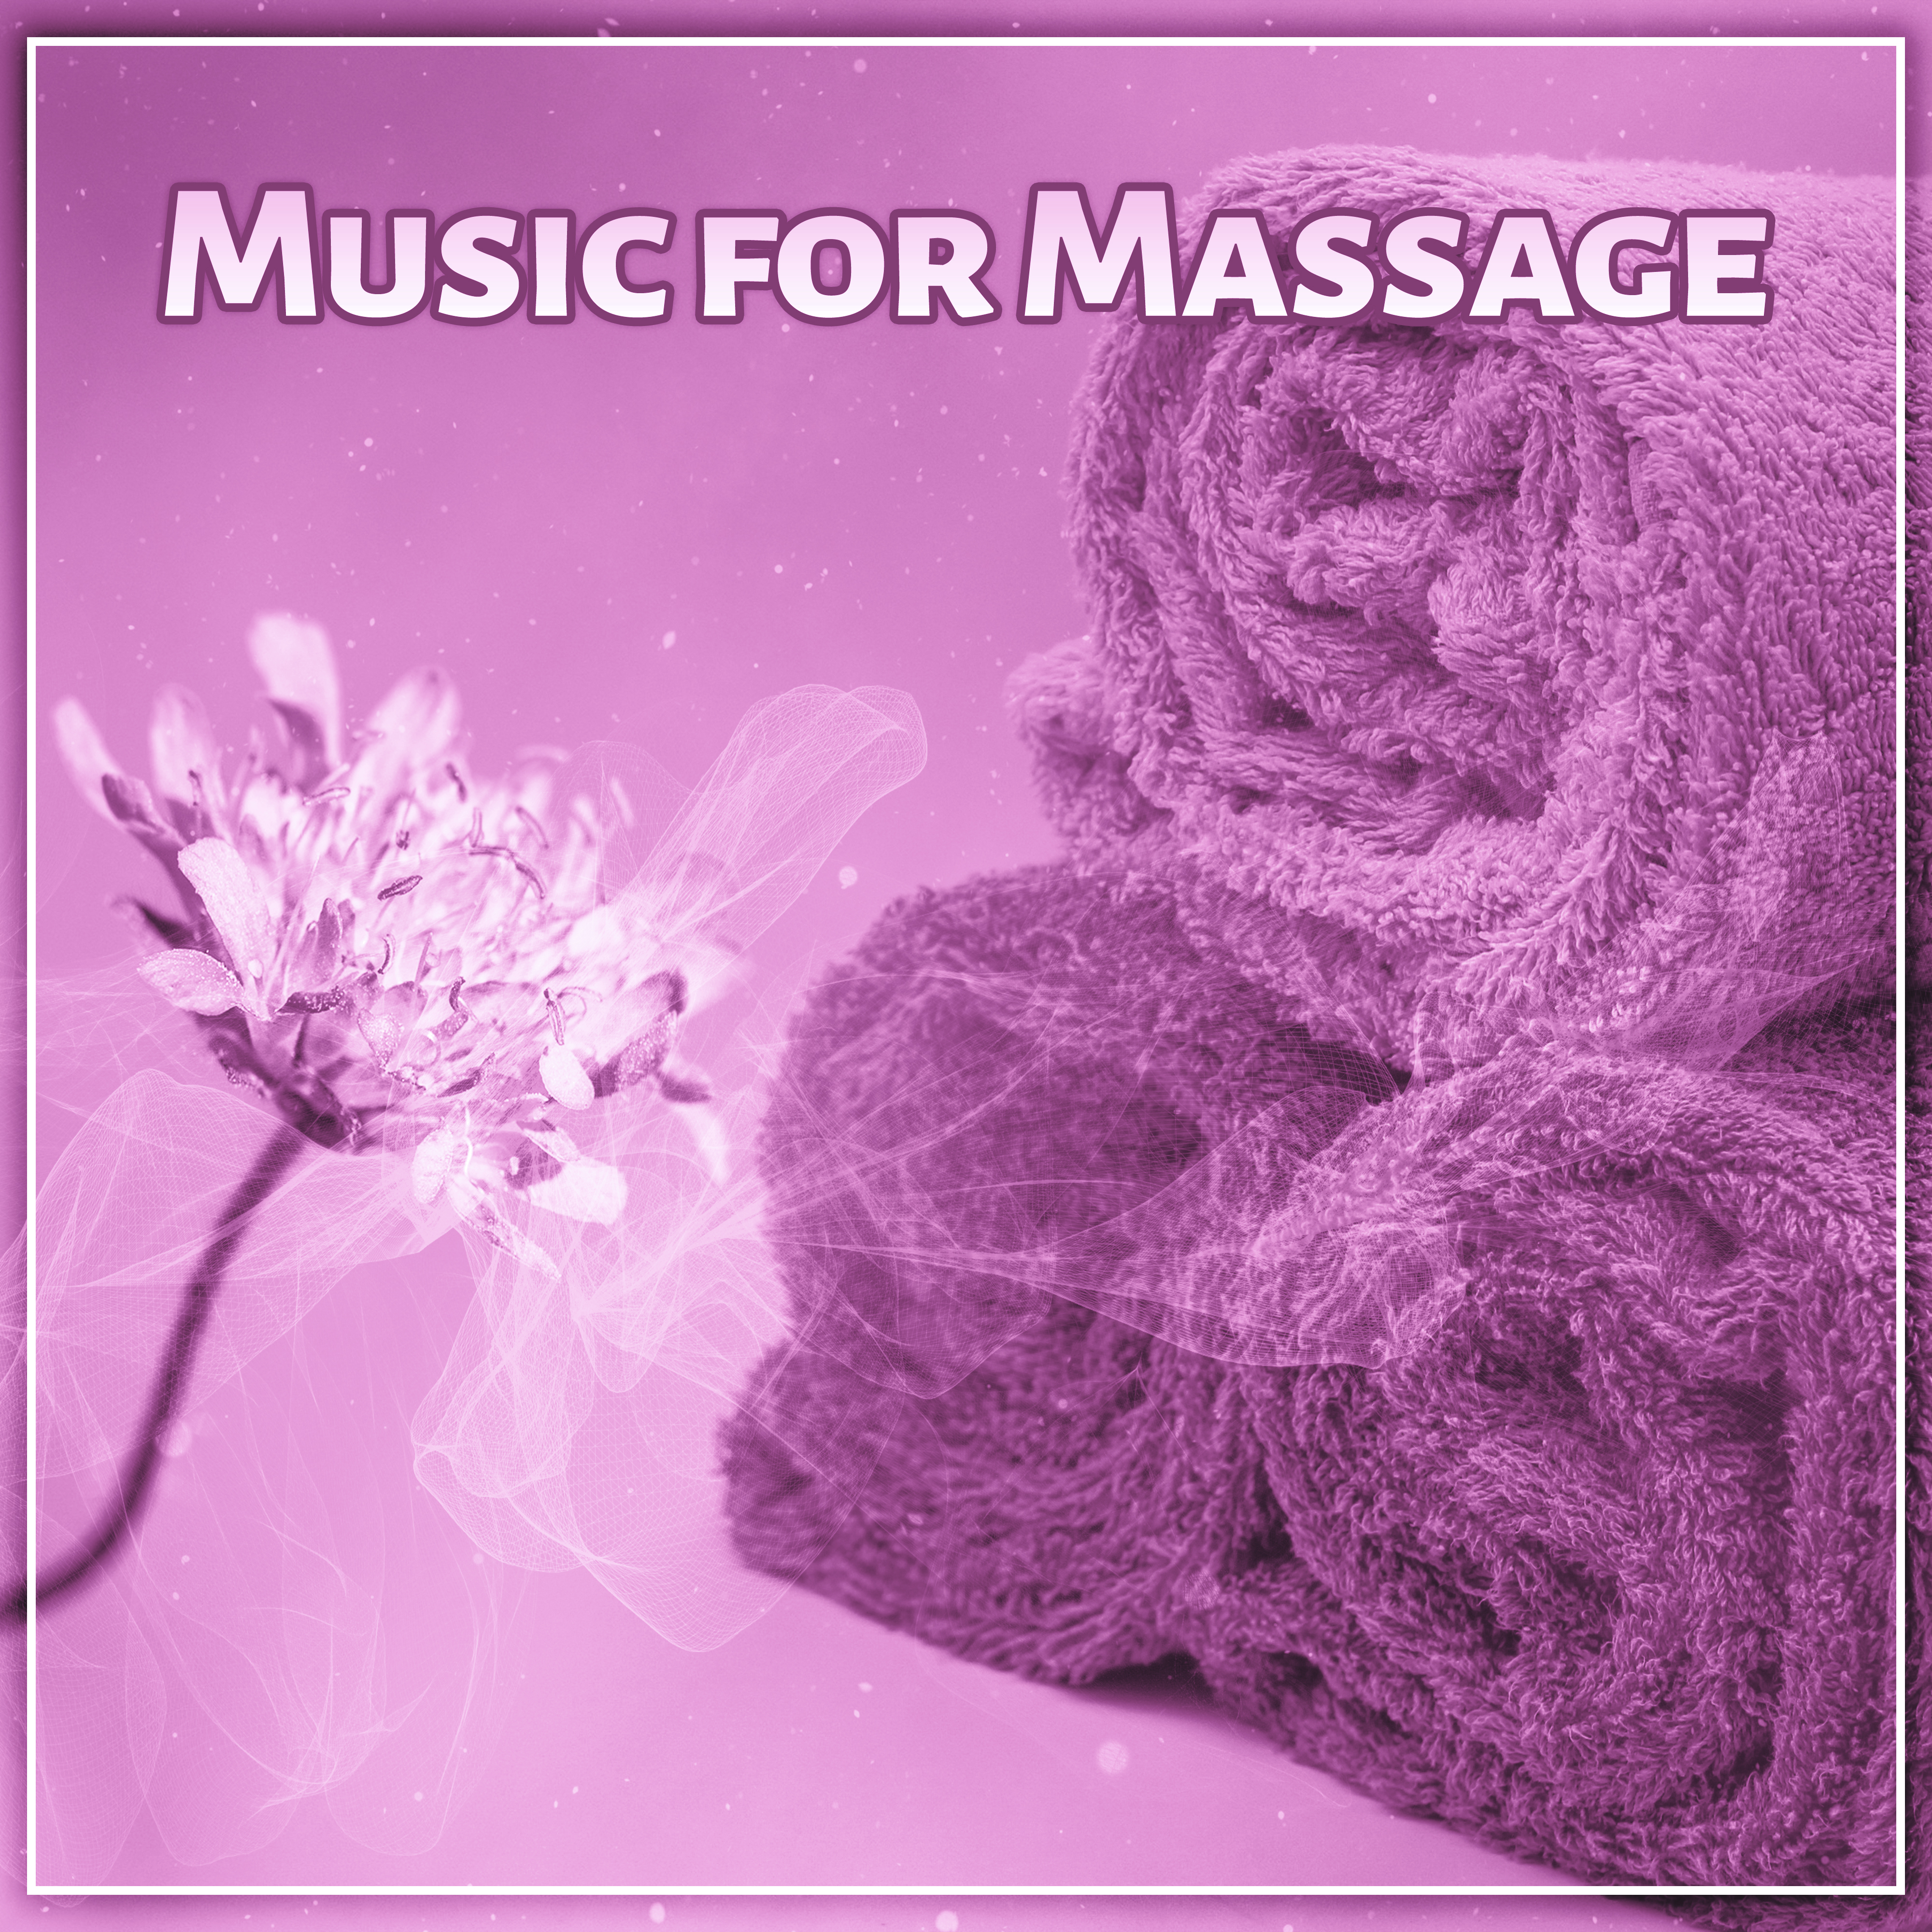 Music for Massage  New Age Instrumental Music, Music for Background to Massage, Spa Music, Wellness, Be Close The Nature